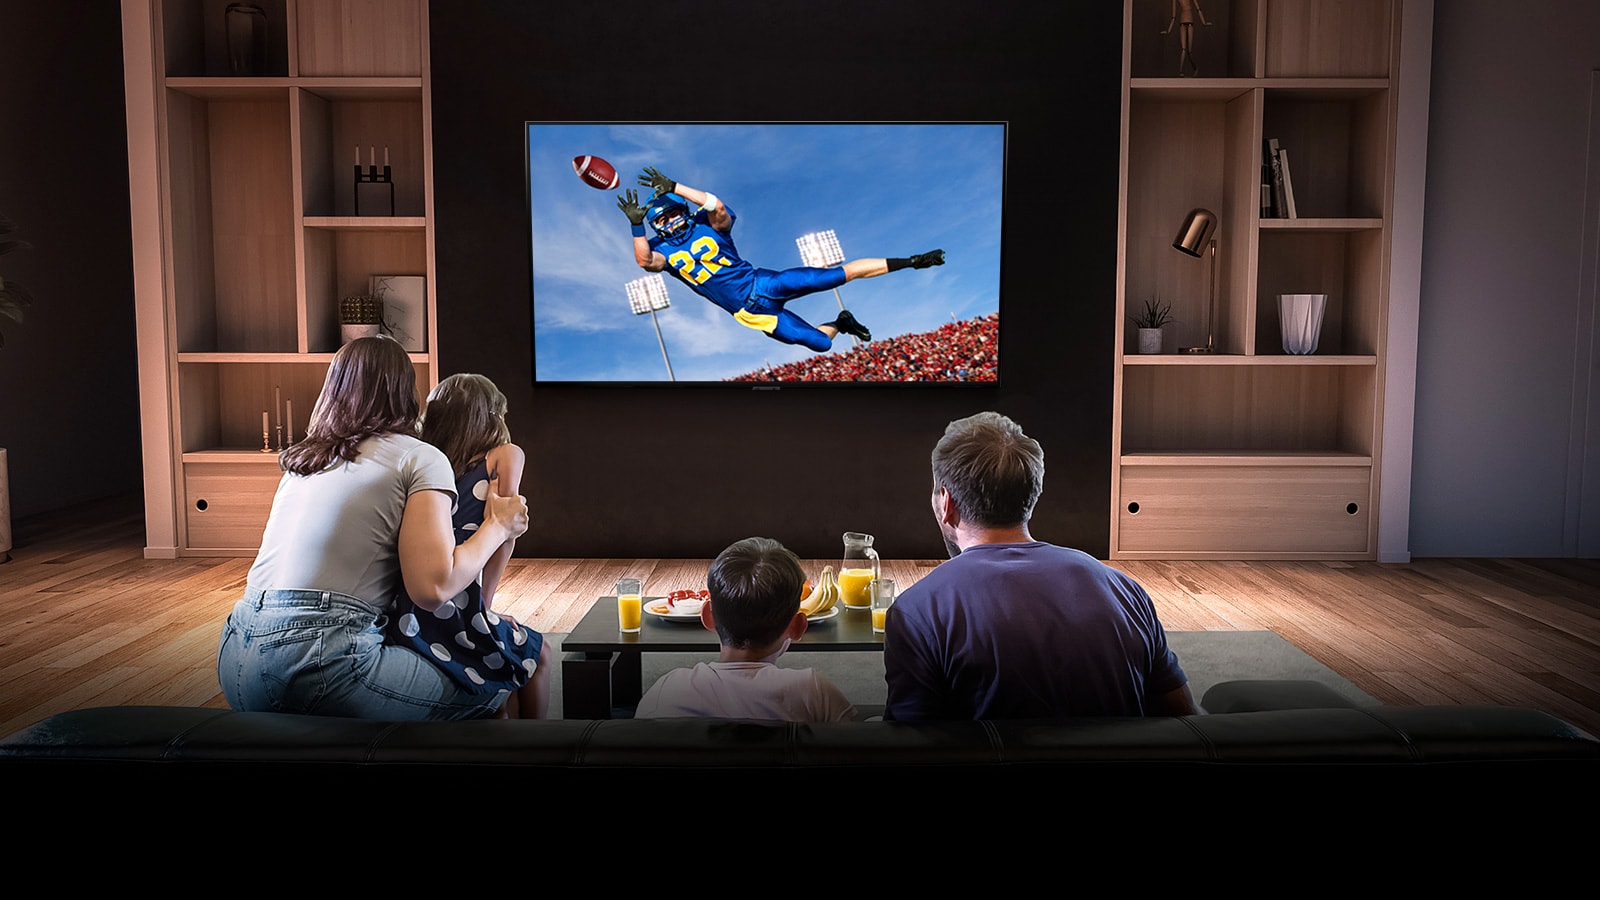 OLED TV gets you closer to the action1